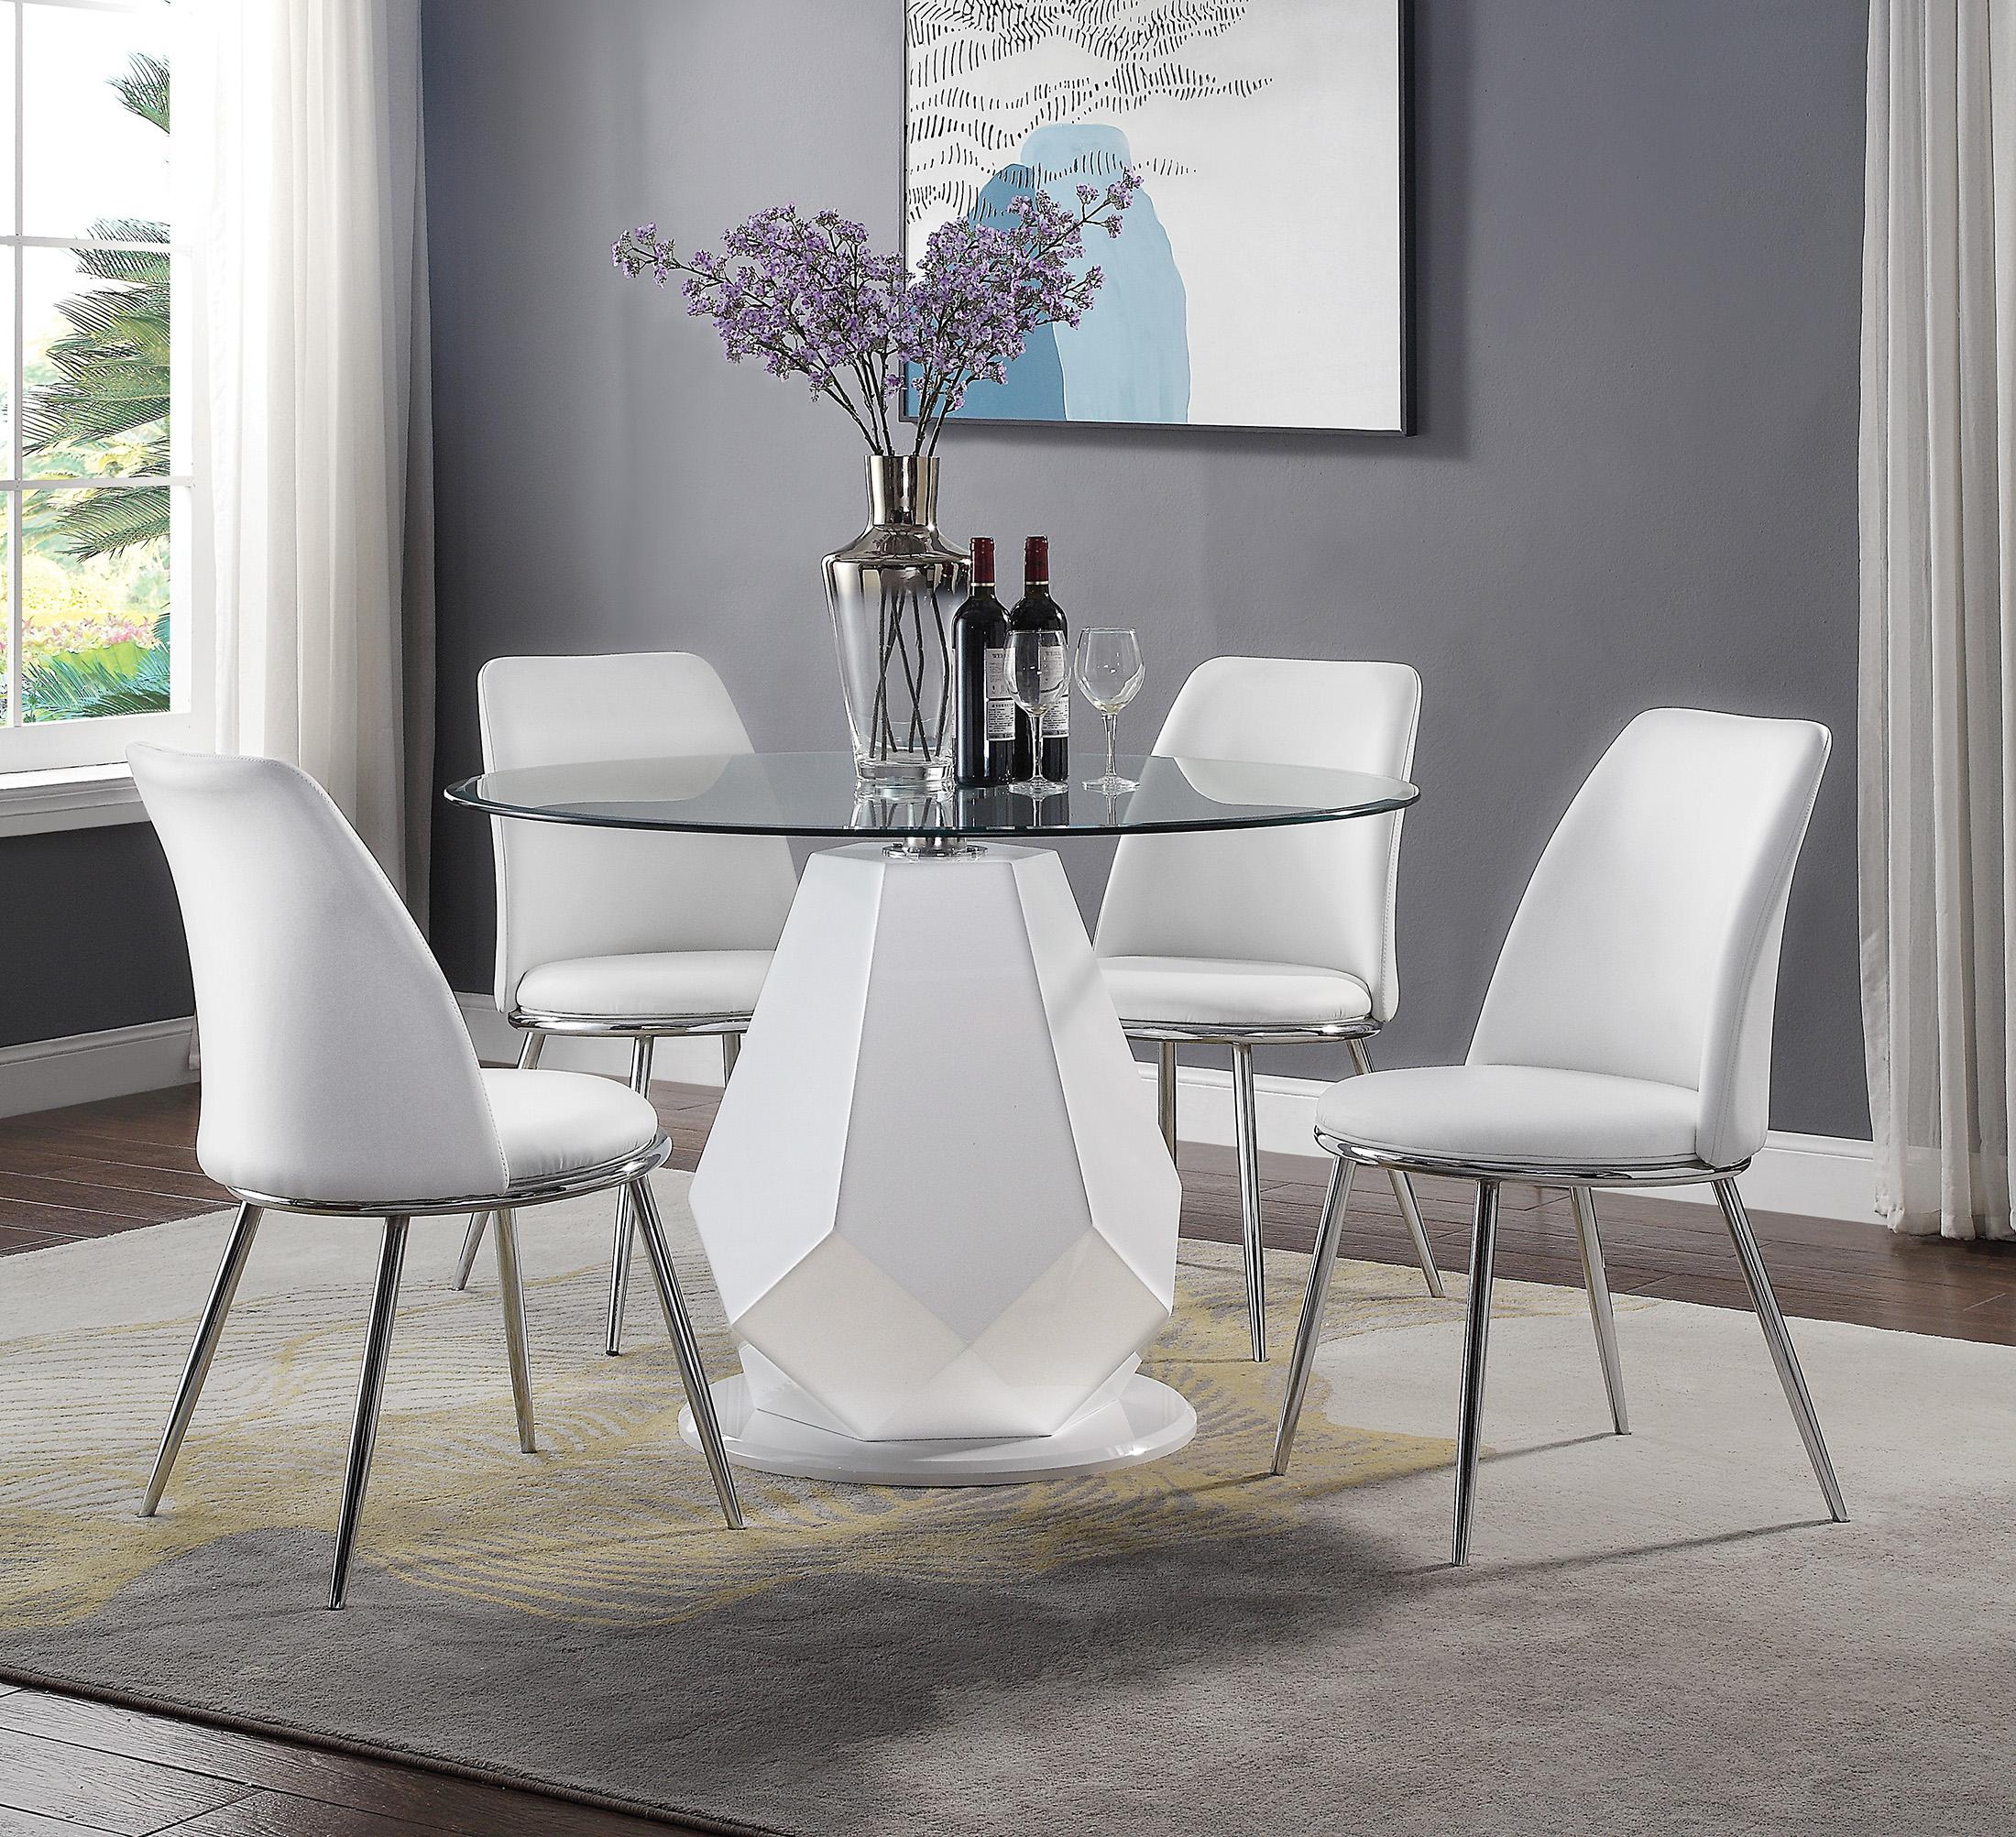 Contemporary, Modern Dining Table Set Chara 74925-Set-5 in Chrome, White PU